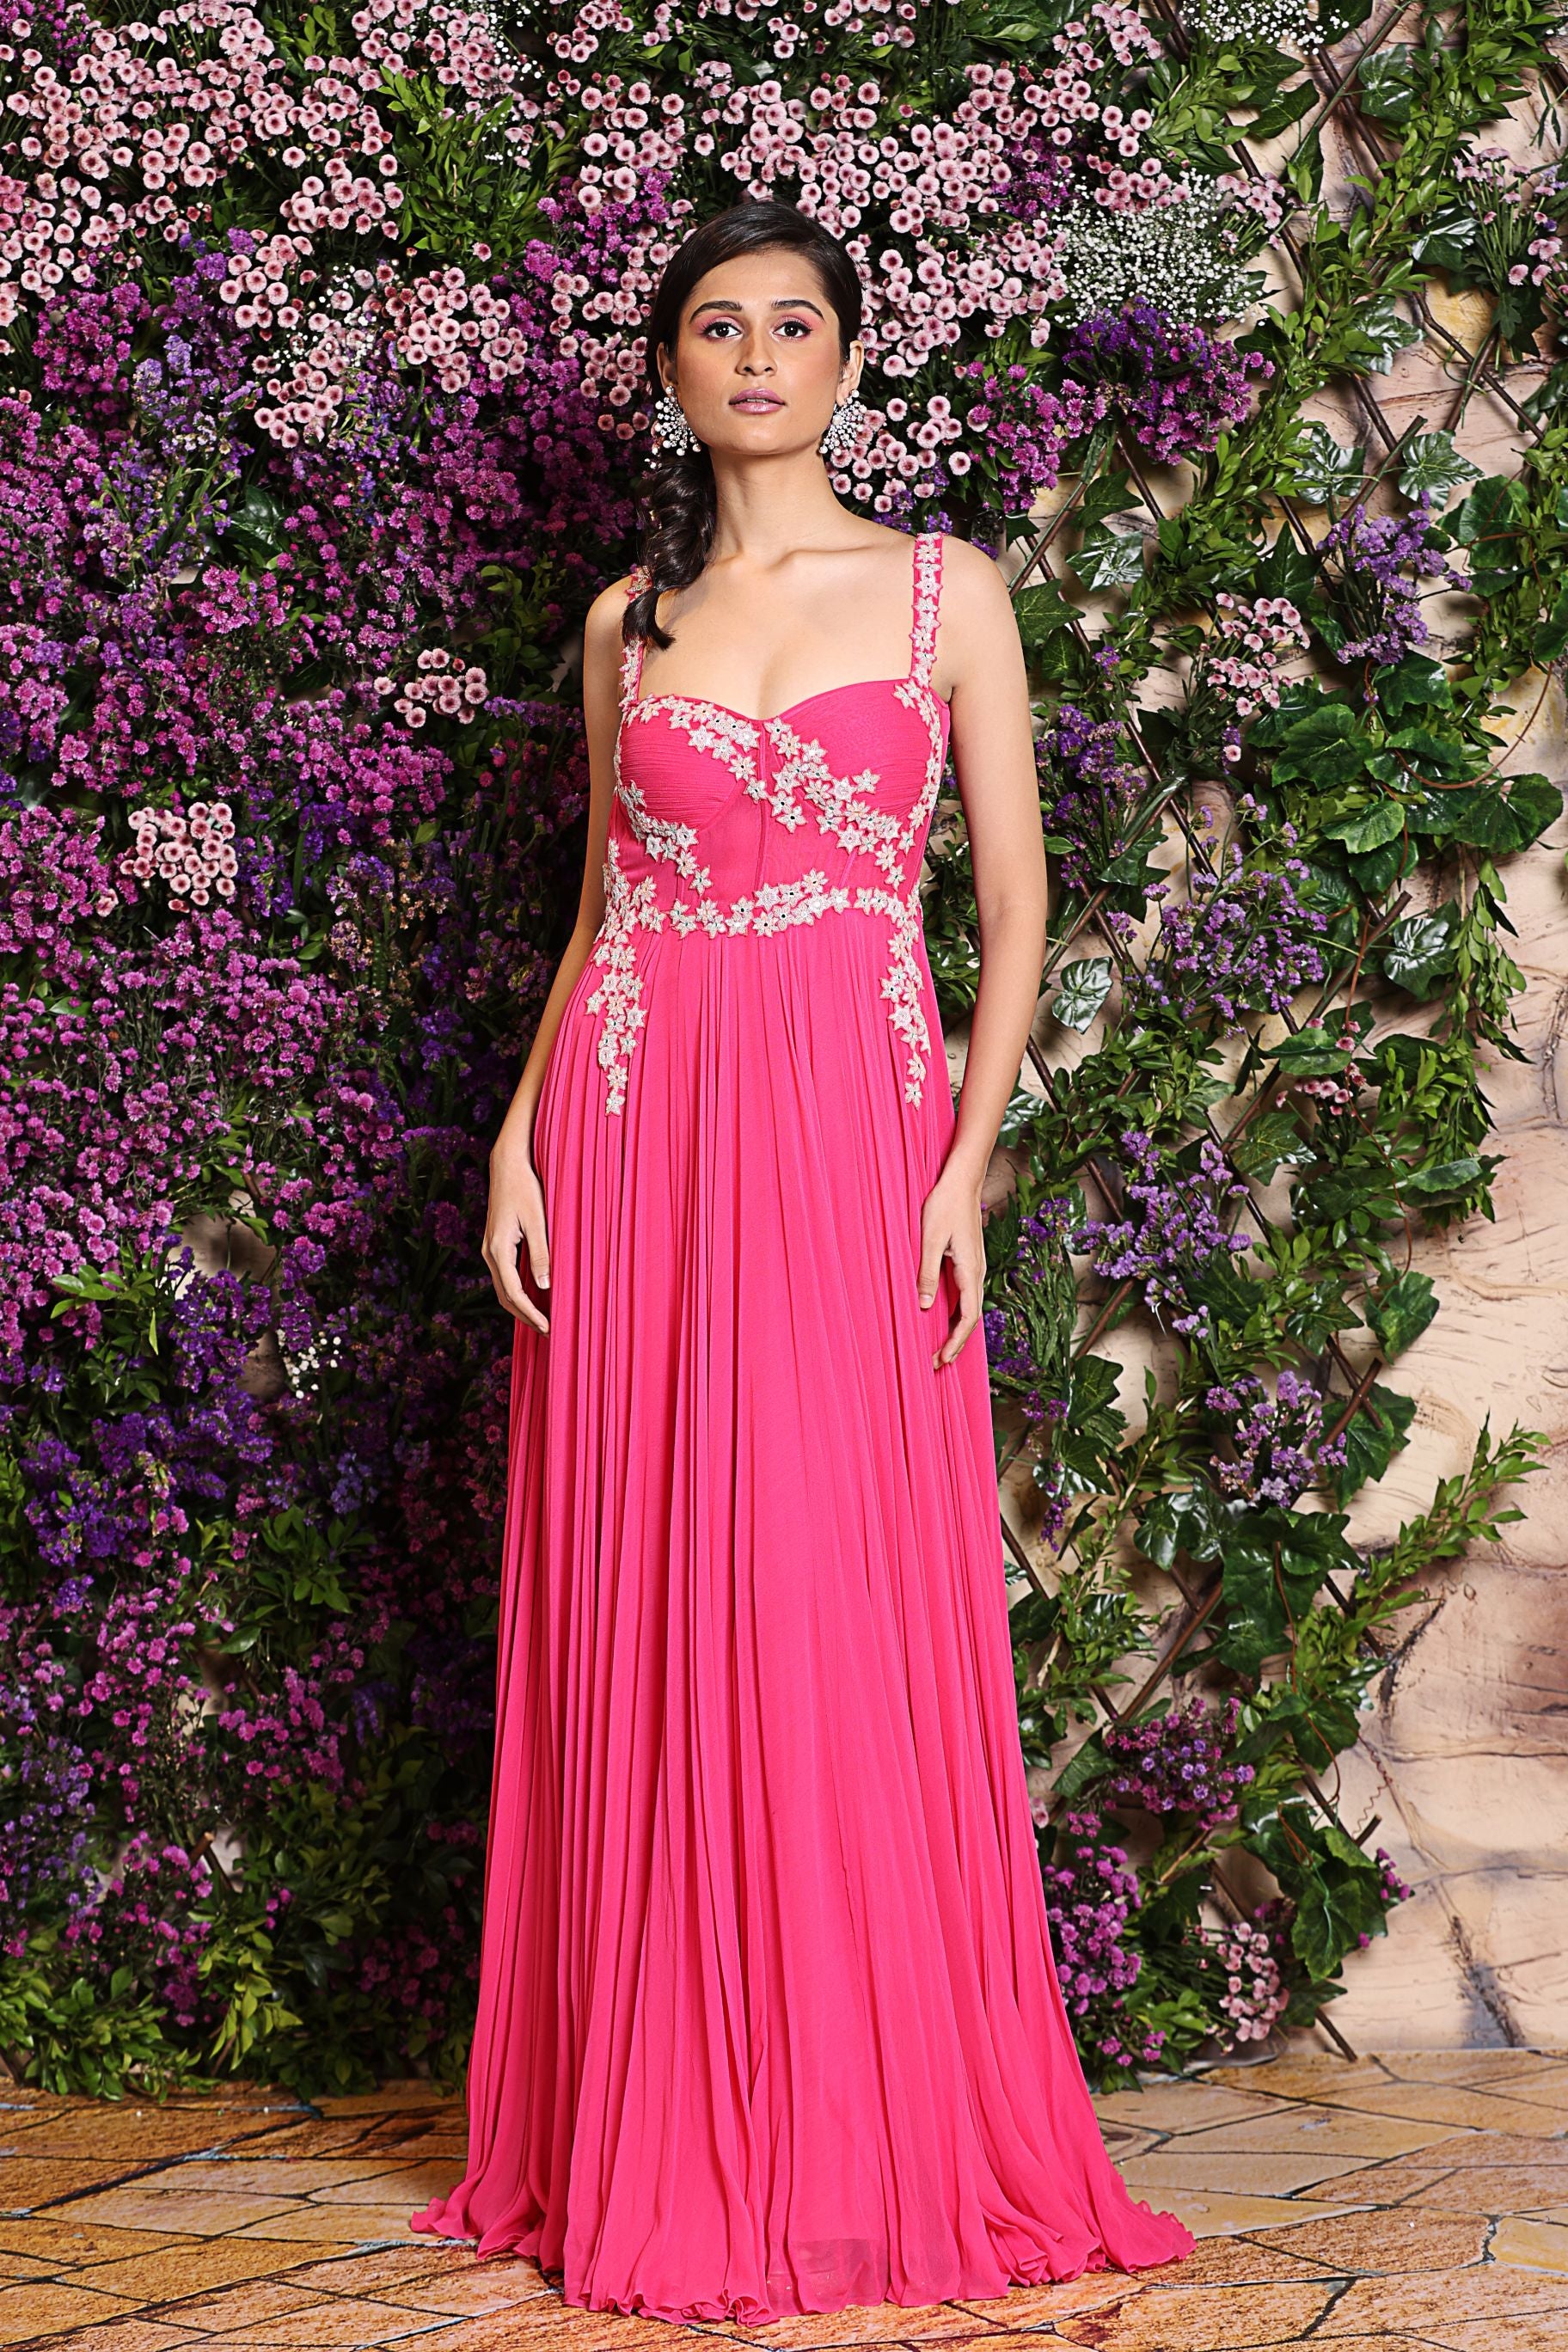 Fuchsia pink corset gown with bugle bead floral embroidery